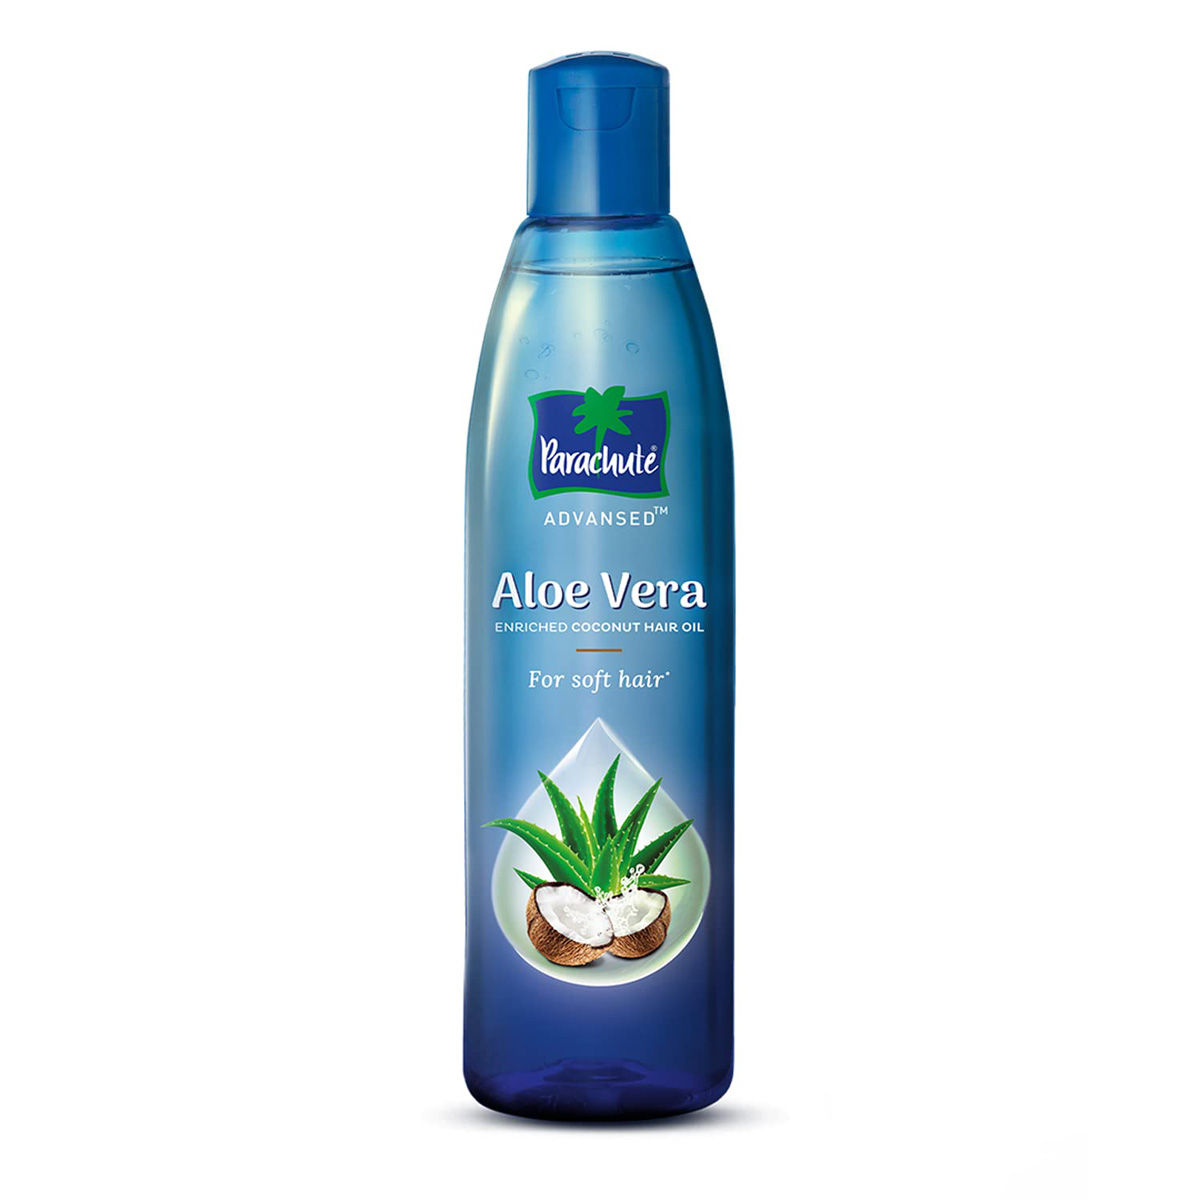 Parachute Aloe Vera Enriched Coconut Hair Oil, 150 ml, Pack of 1 